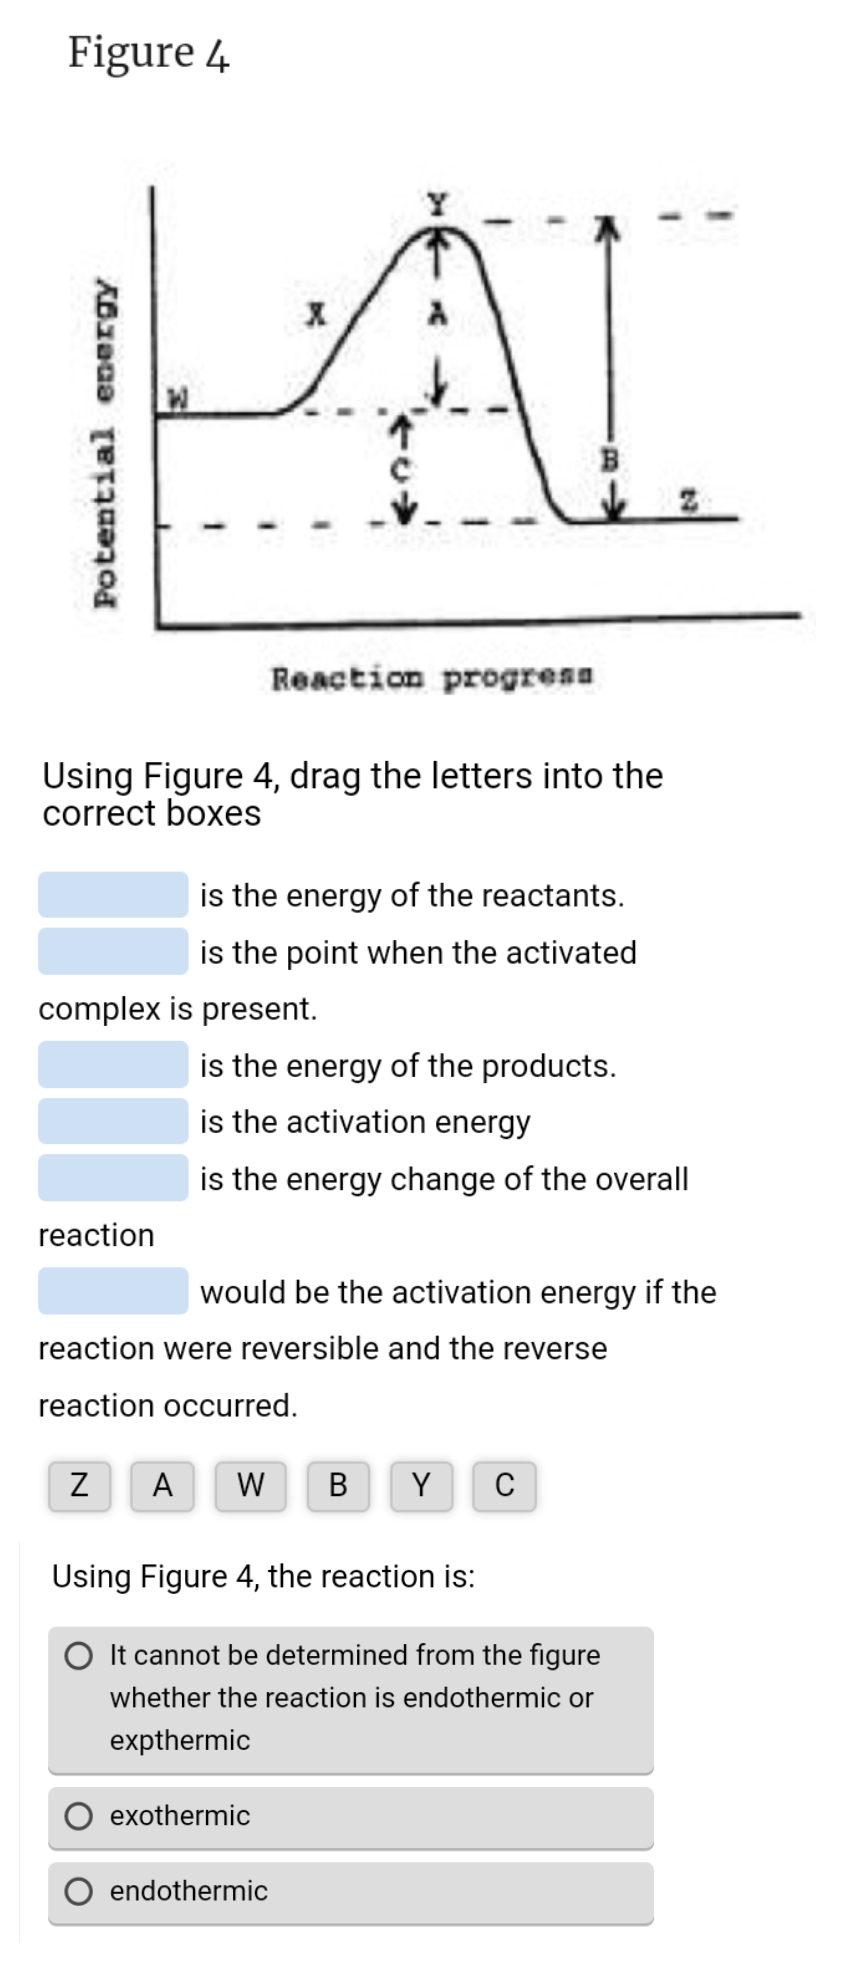 Figure 4
Potential energy
Using Figure 4, drag the letters into the
correct boxes
reaction
is the energy of the reactants.
is the point when the activated
complex is present.
Reaction progress
is the energy of the products.
is the activation energy
is the energy change of the overall
would be the activation energy if the
reaction were reversible and the reverse
reaction occurred.
Z A W
Using Figure 4, the reaction is:
exothermic
B Y C
It cannot be determined from the figure
whether the reaction is endothermic or
expthermic
endothermic